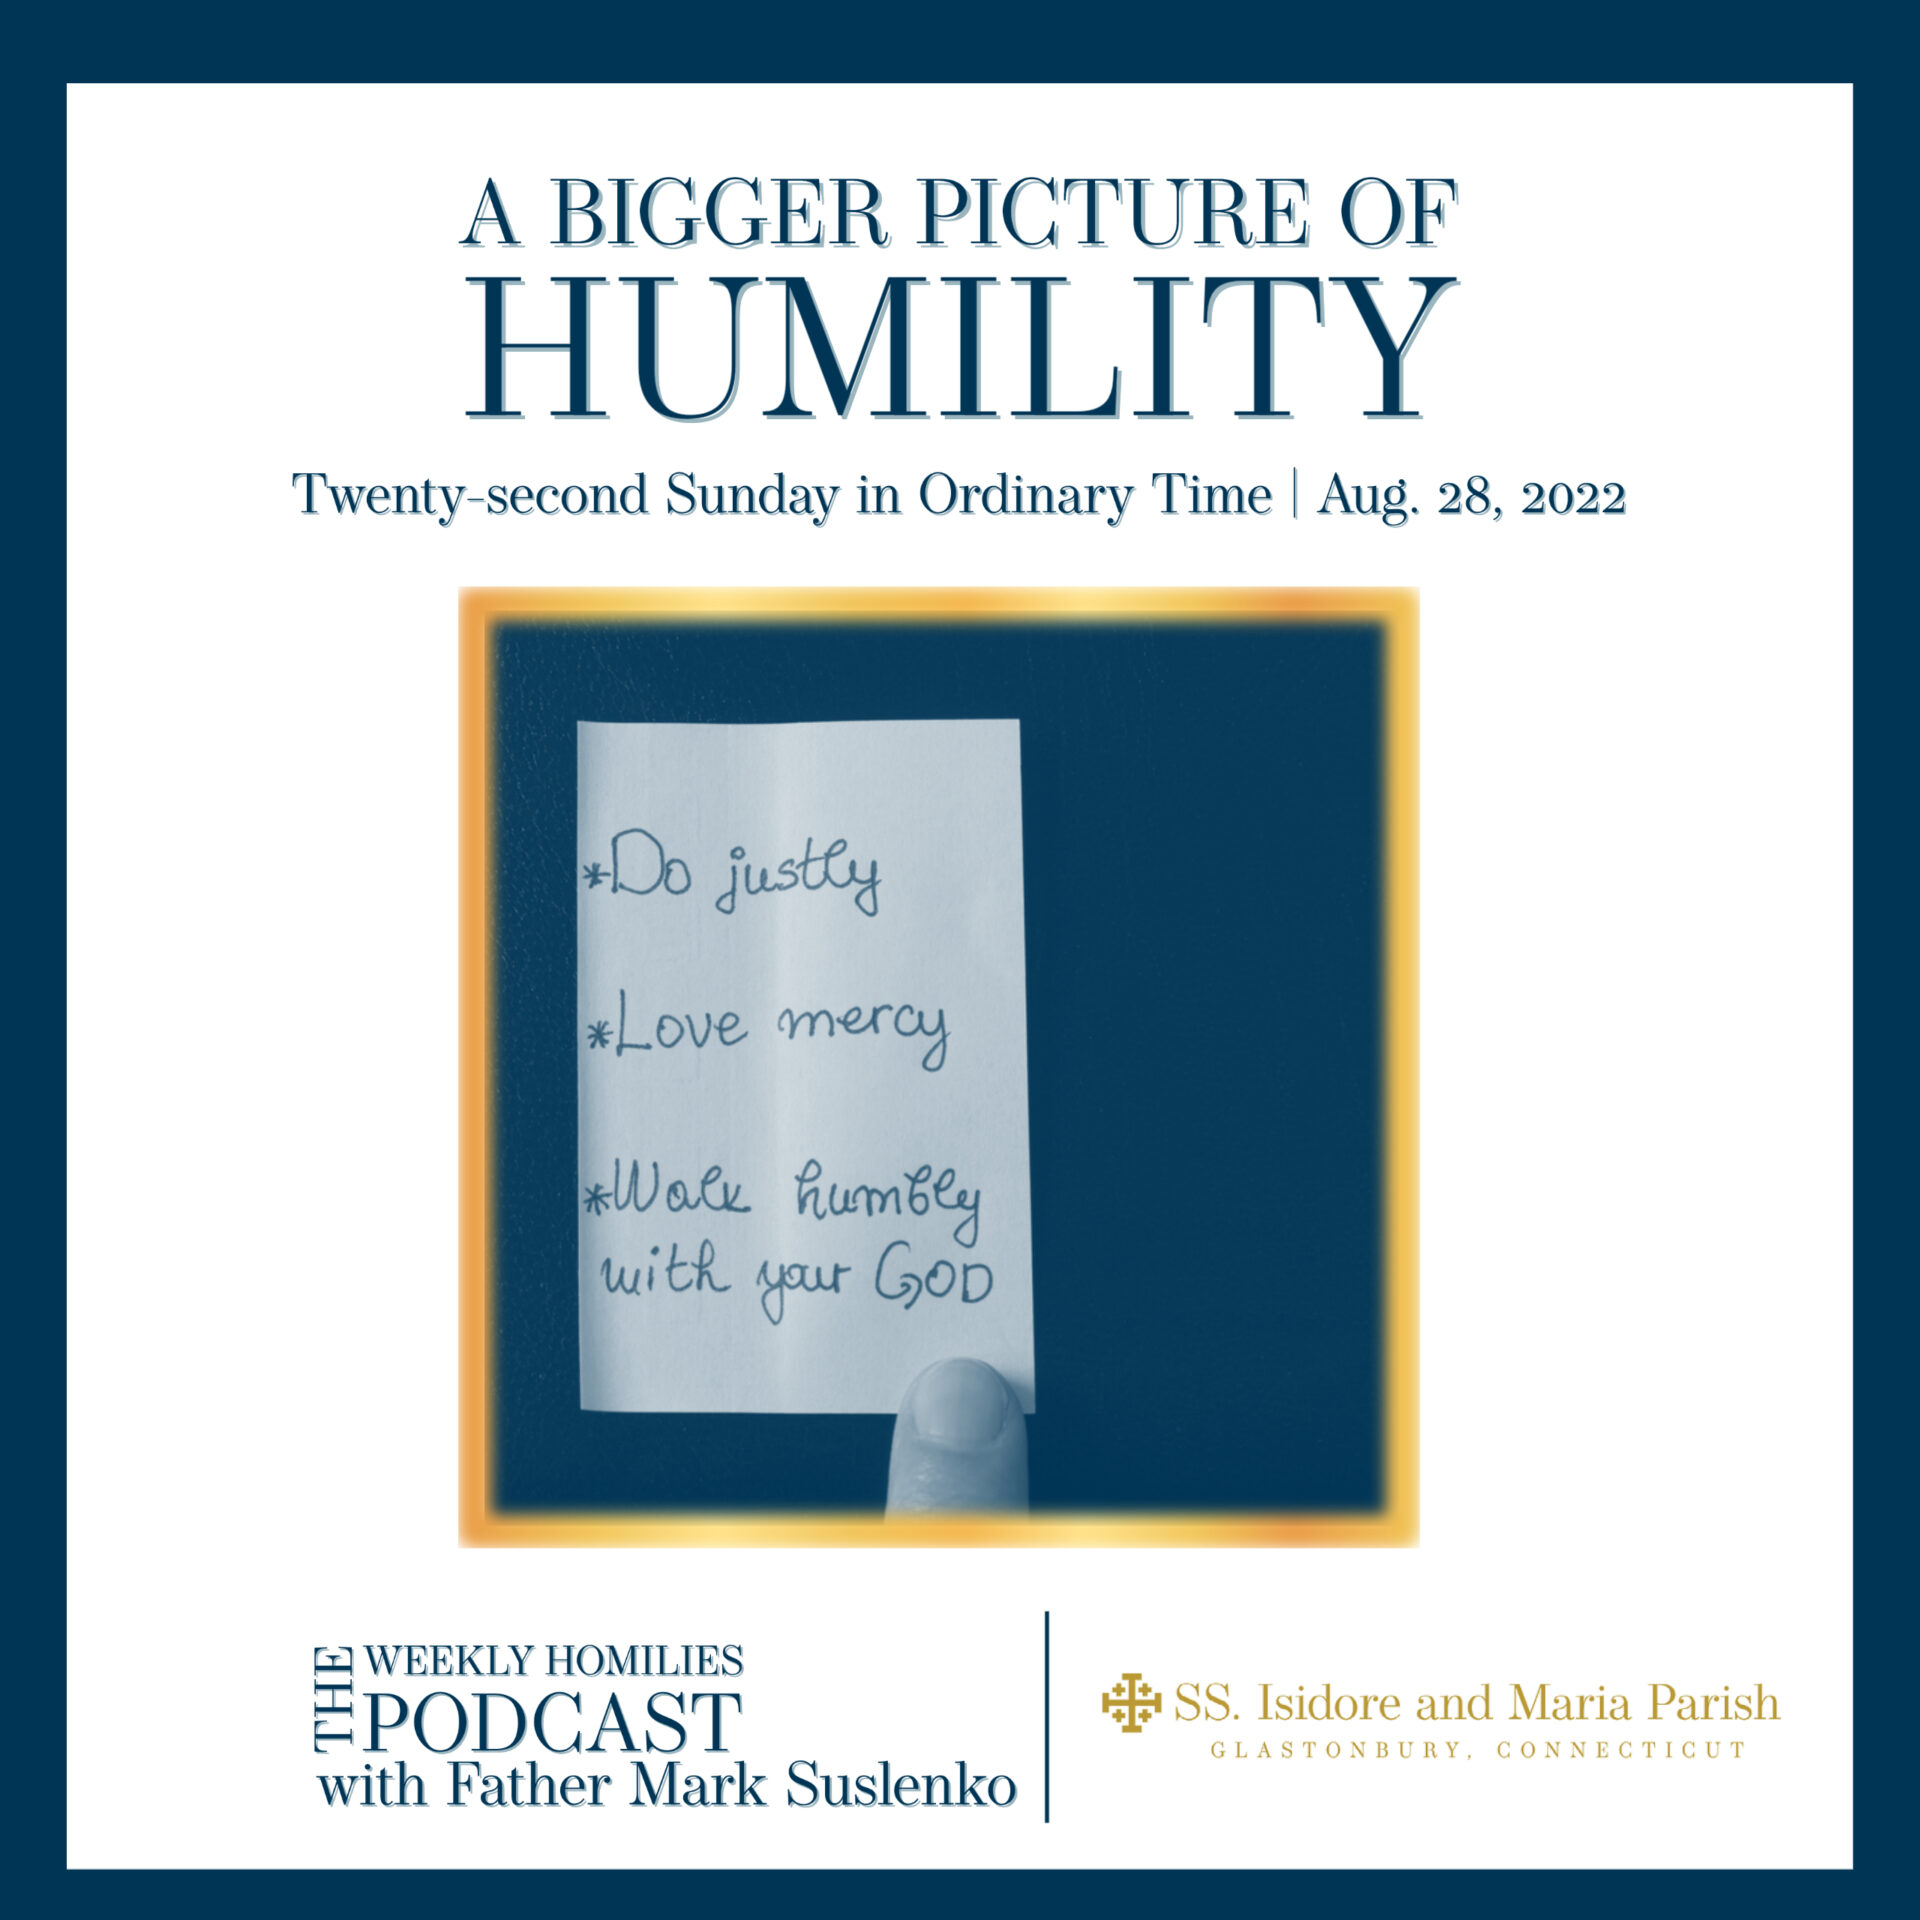 PODCAST: A Bigger Picture of Humility